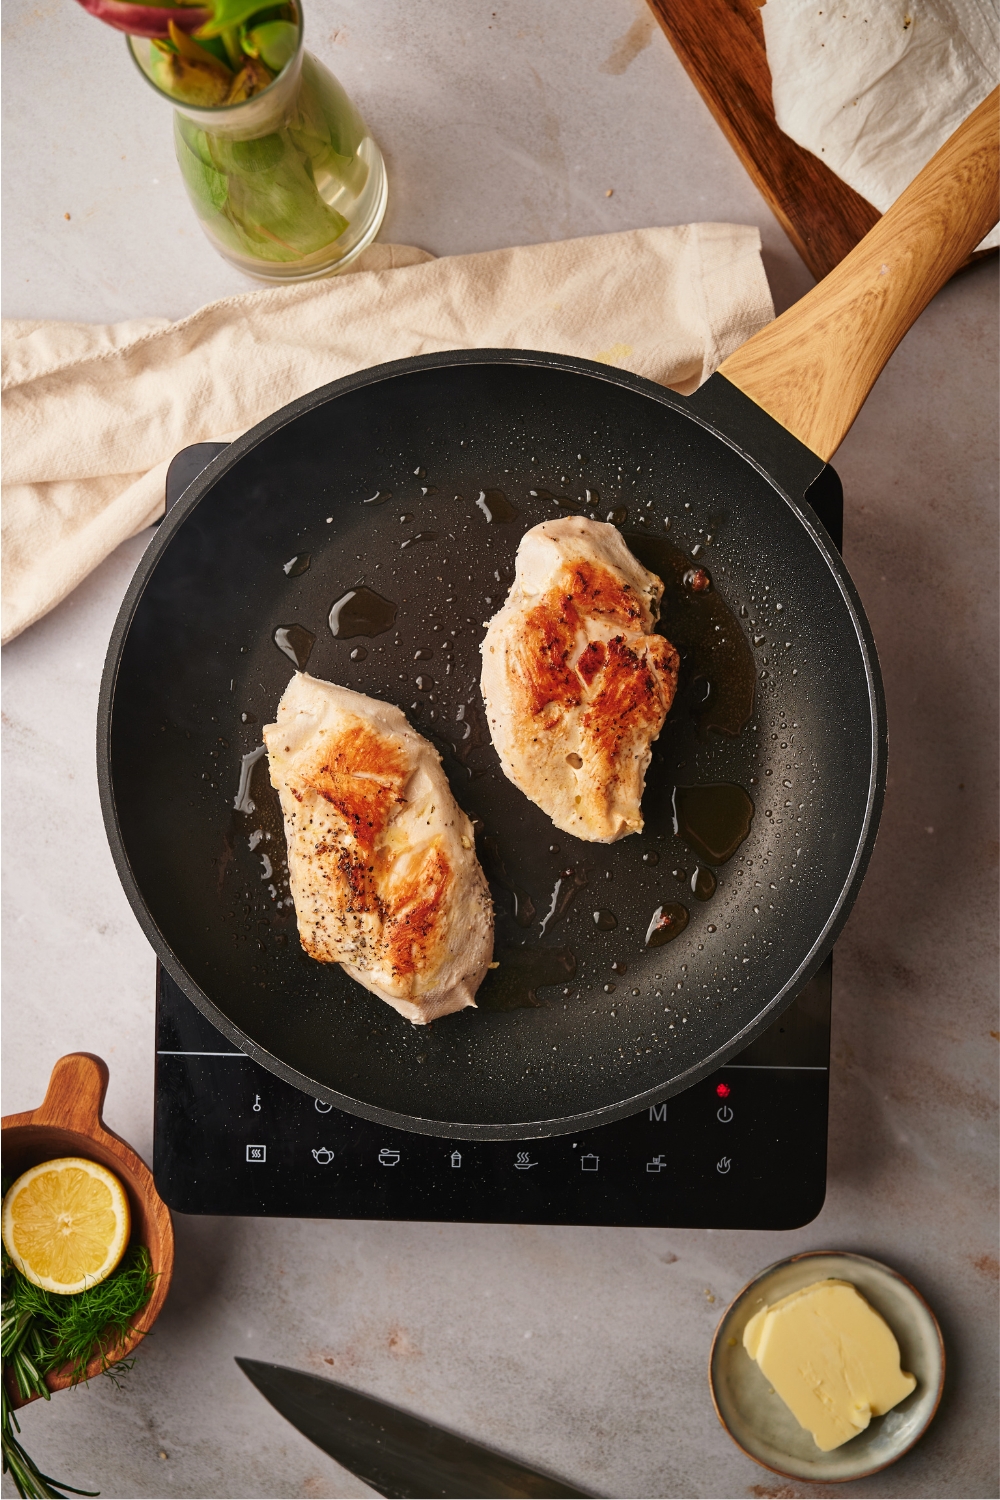 Two seared chicken breasts in a black skillet atop an electric burner.